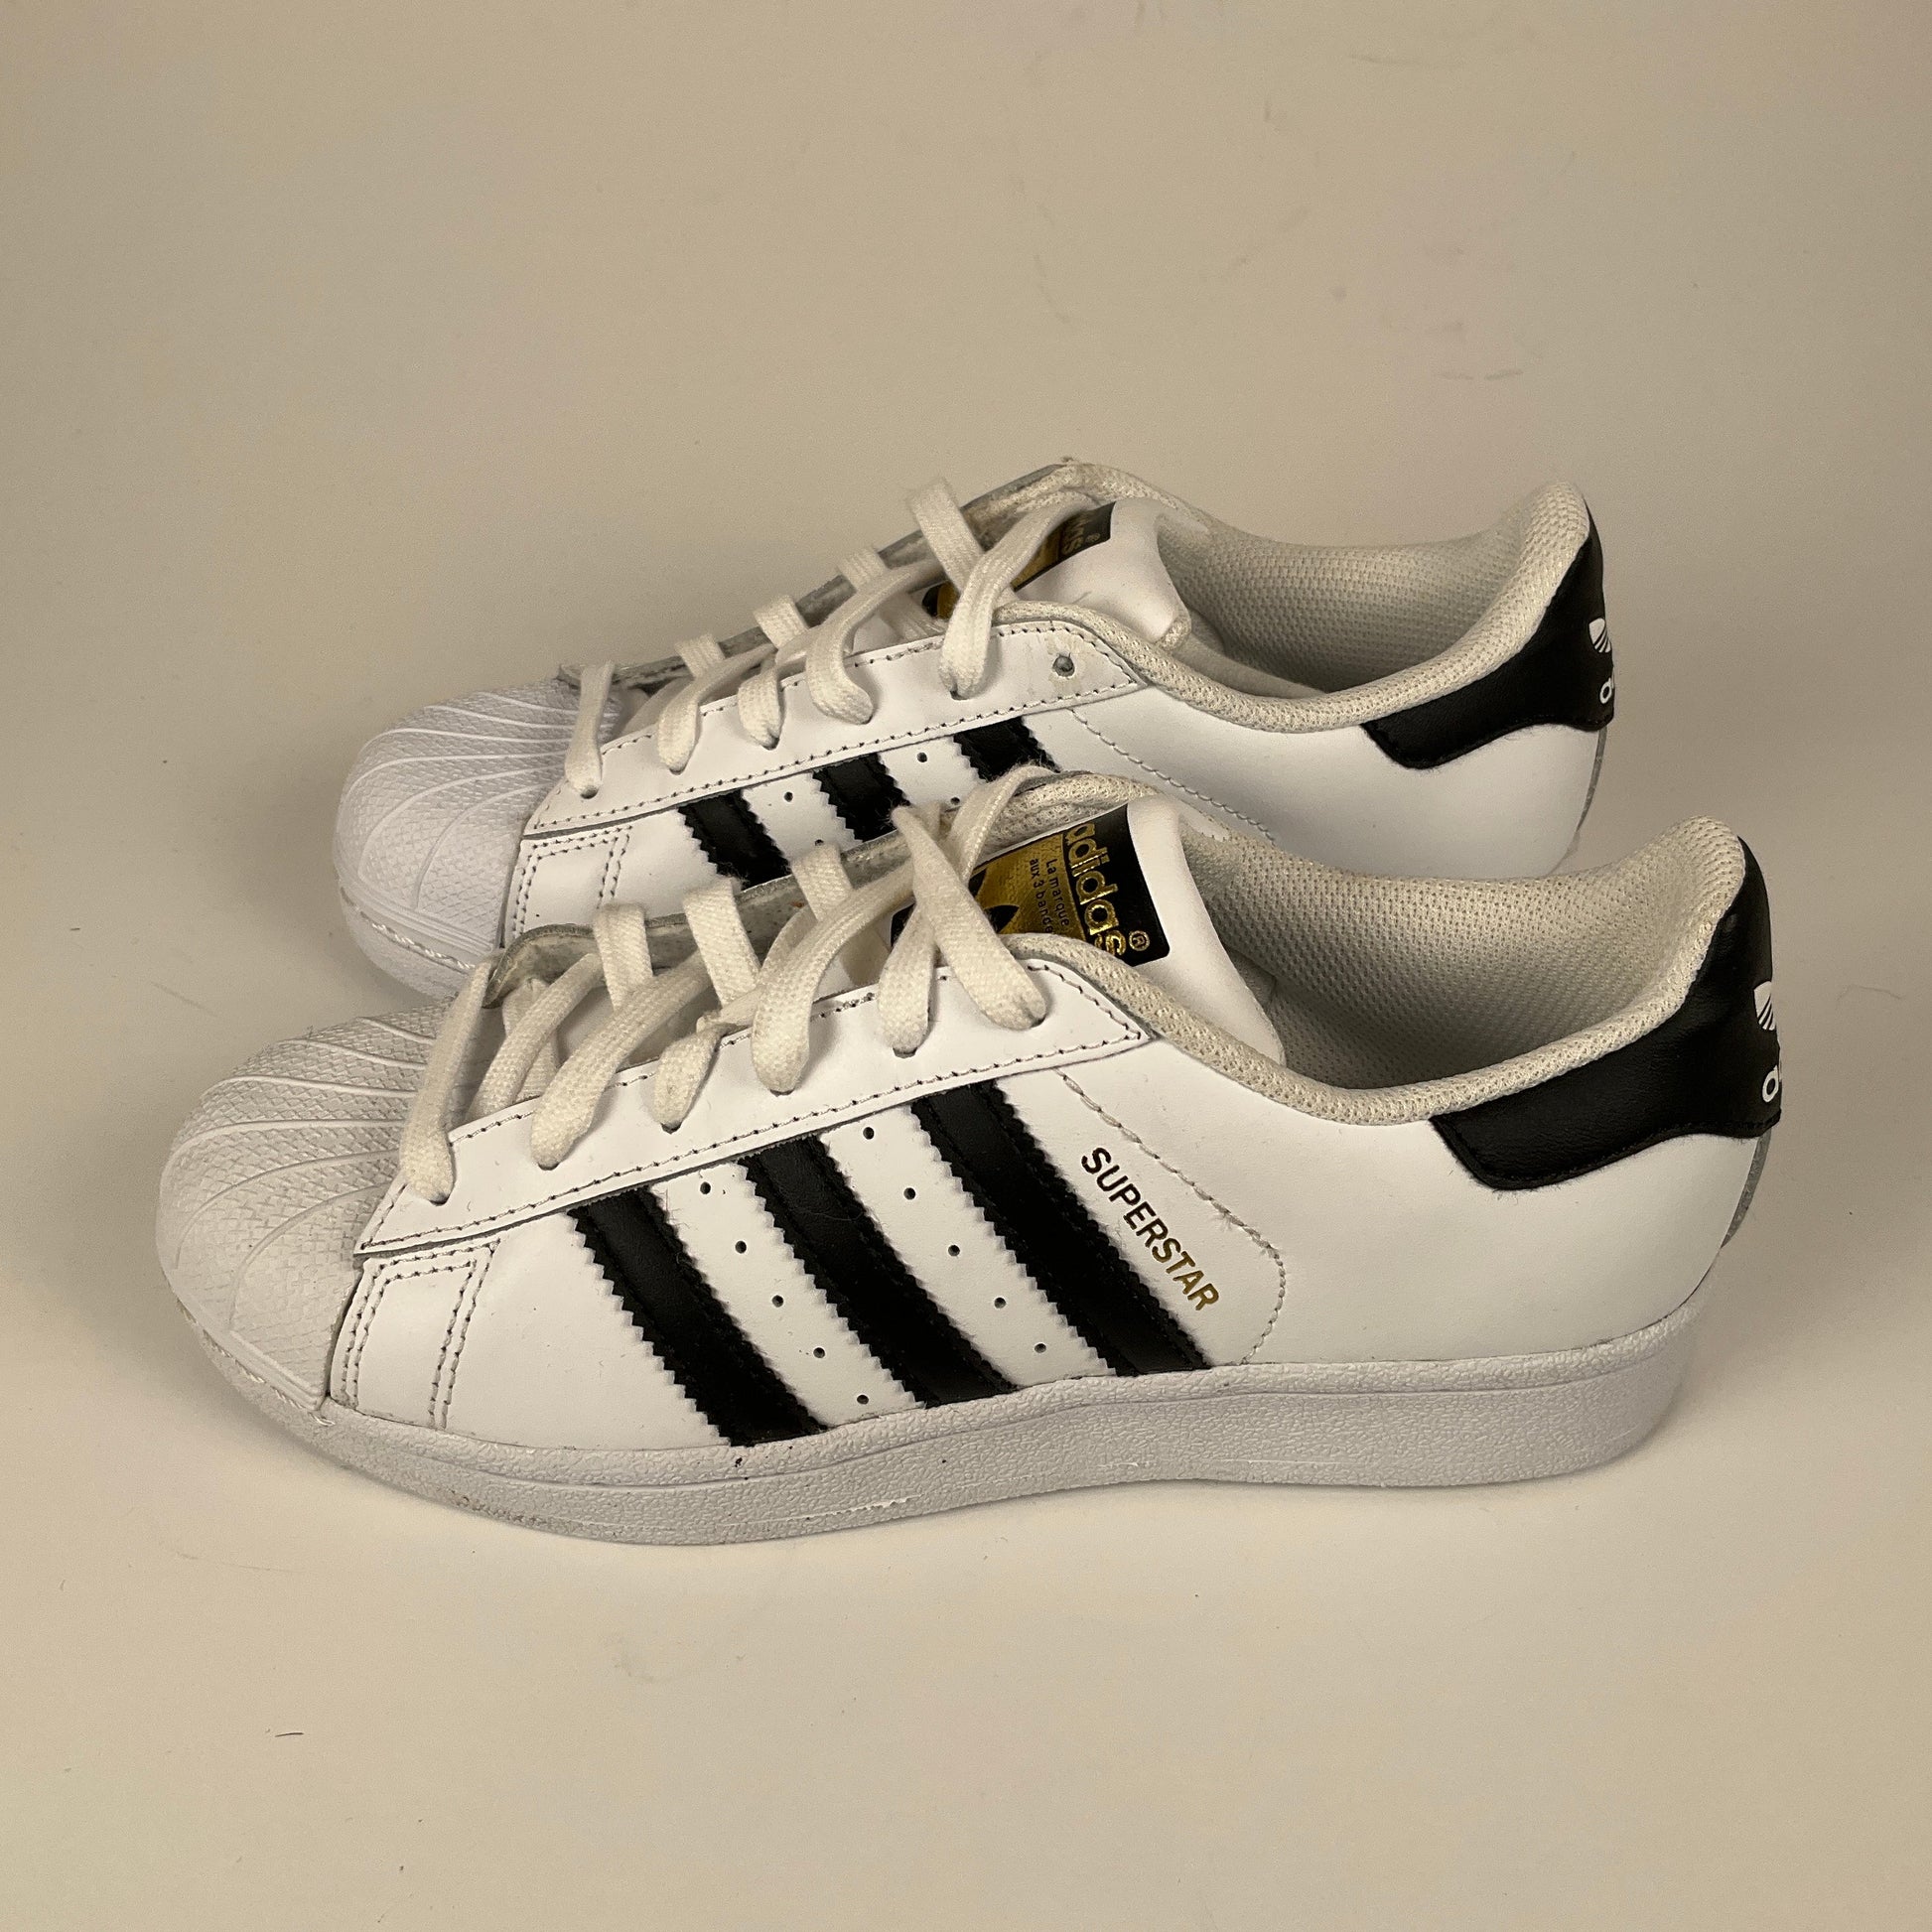 Adidas - Sneakers - Size 36 - Shoes